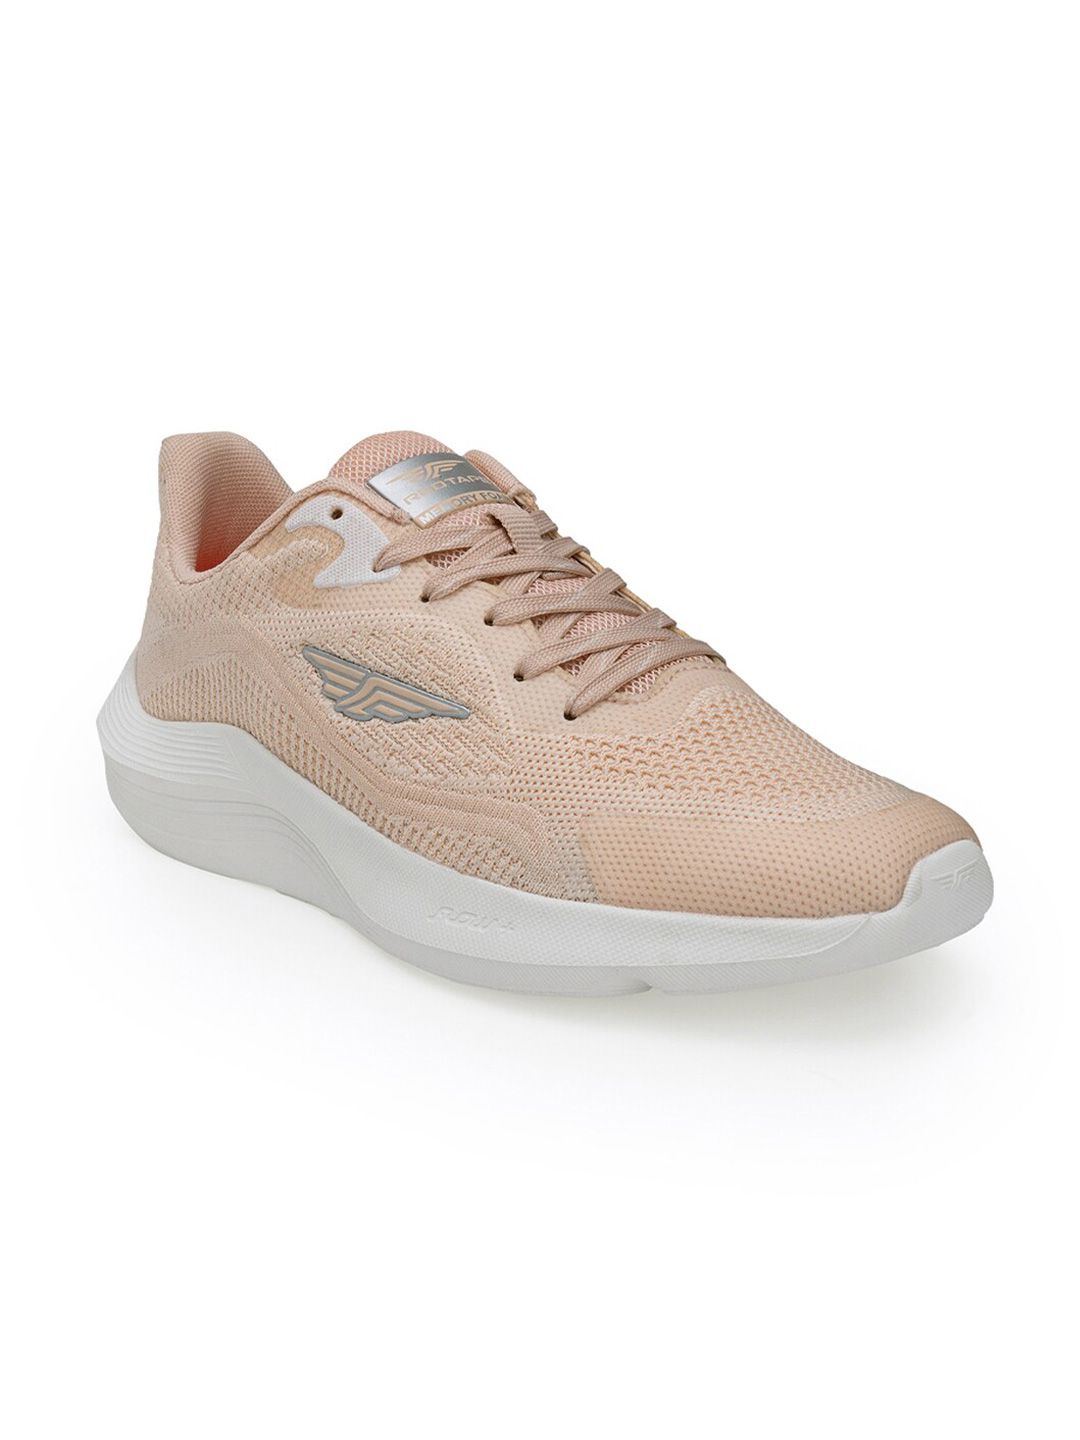 Red Tape Women Peach Sports Shoes Price in India